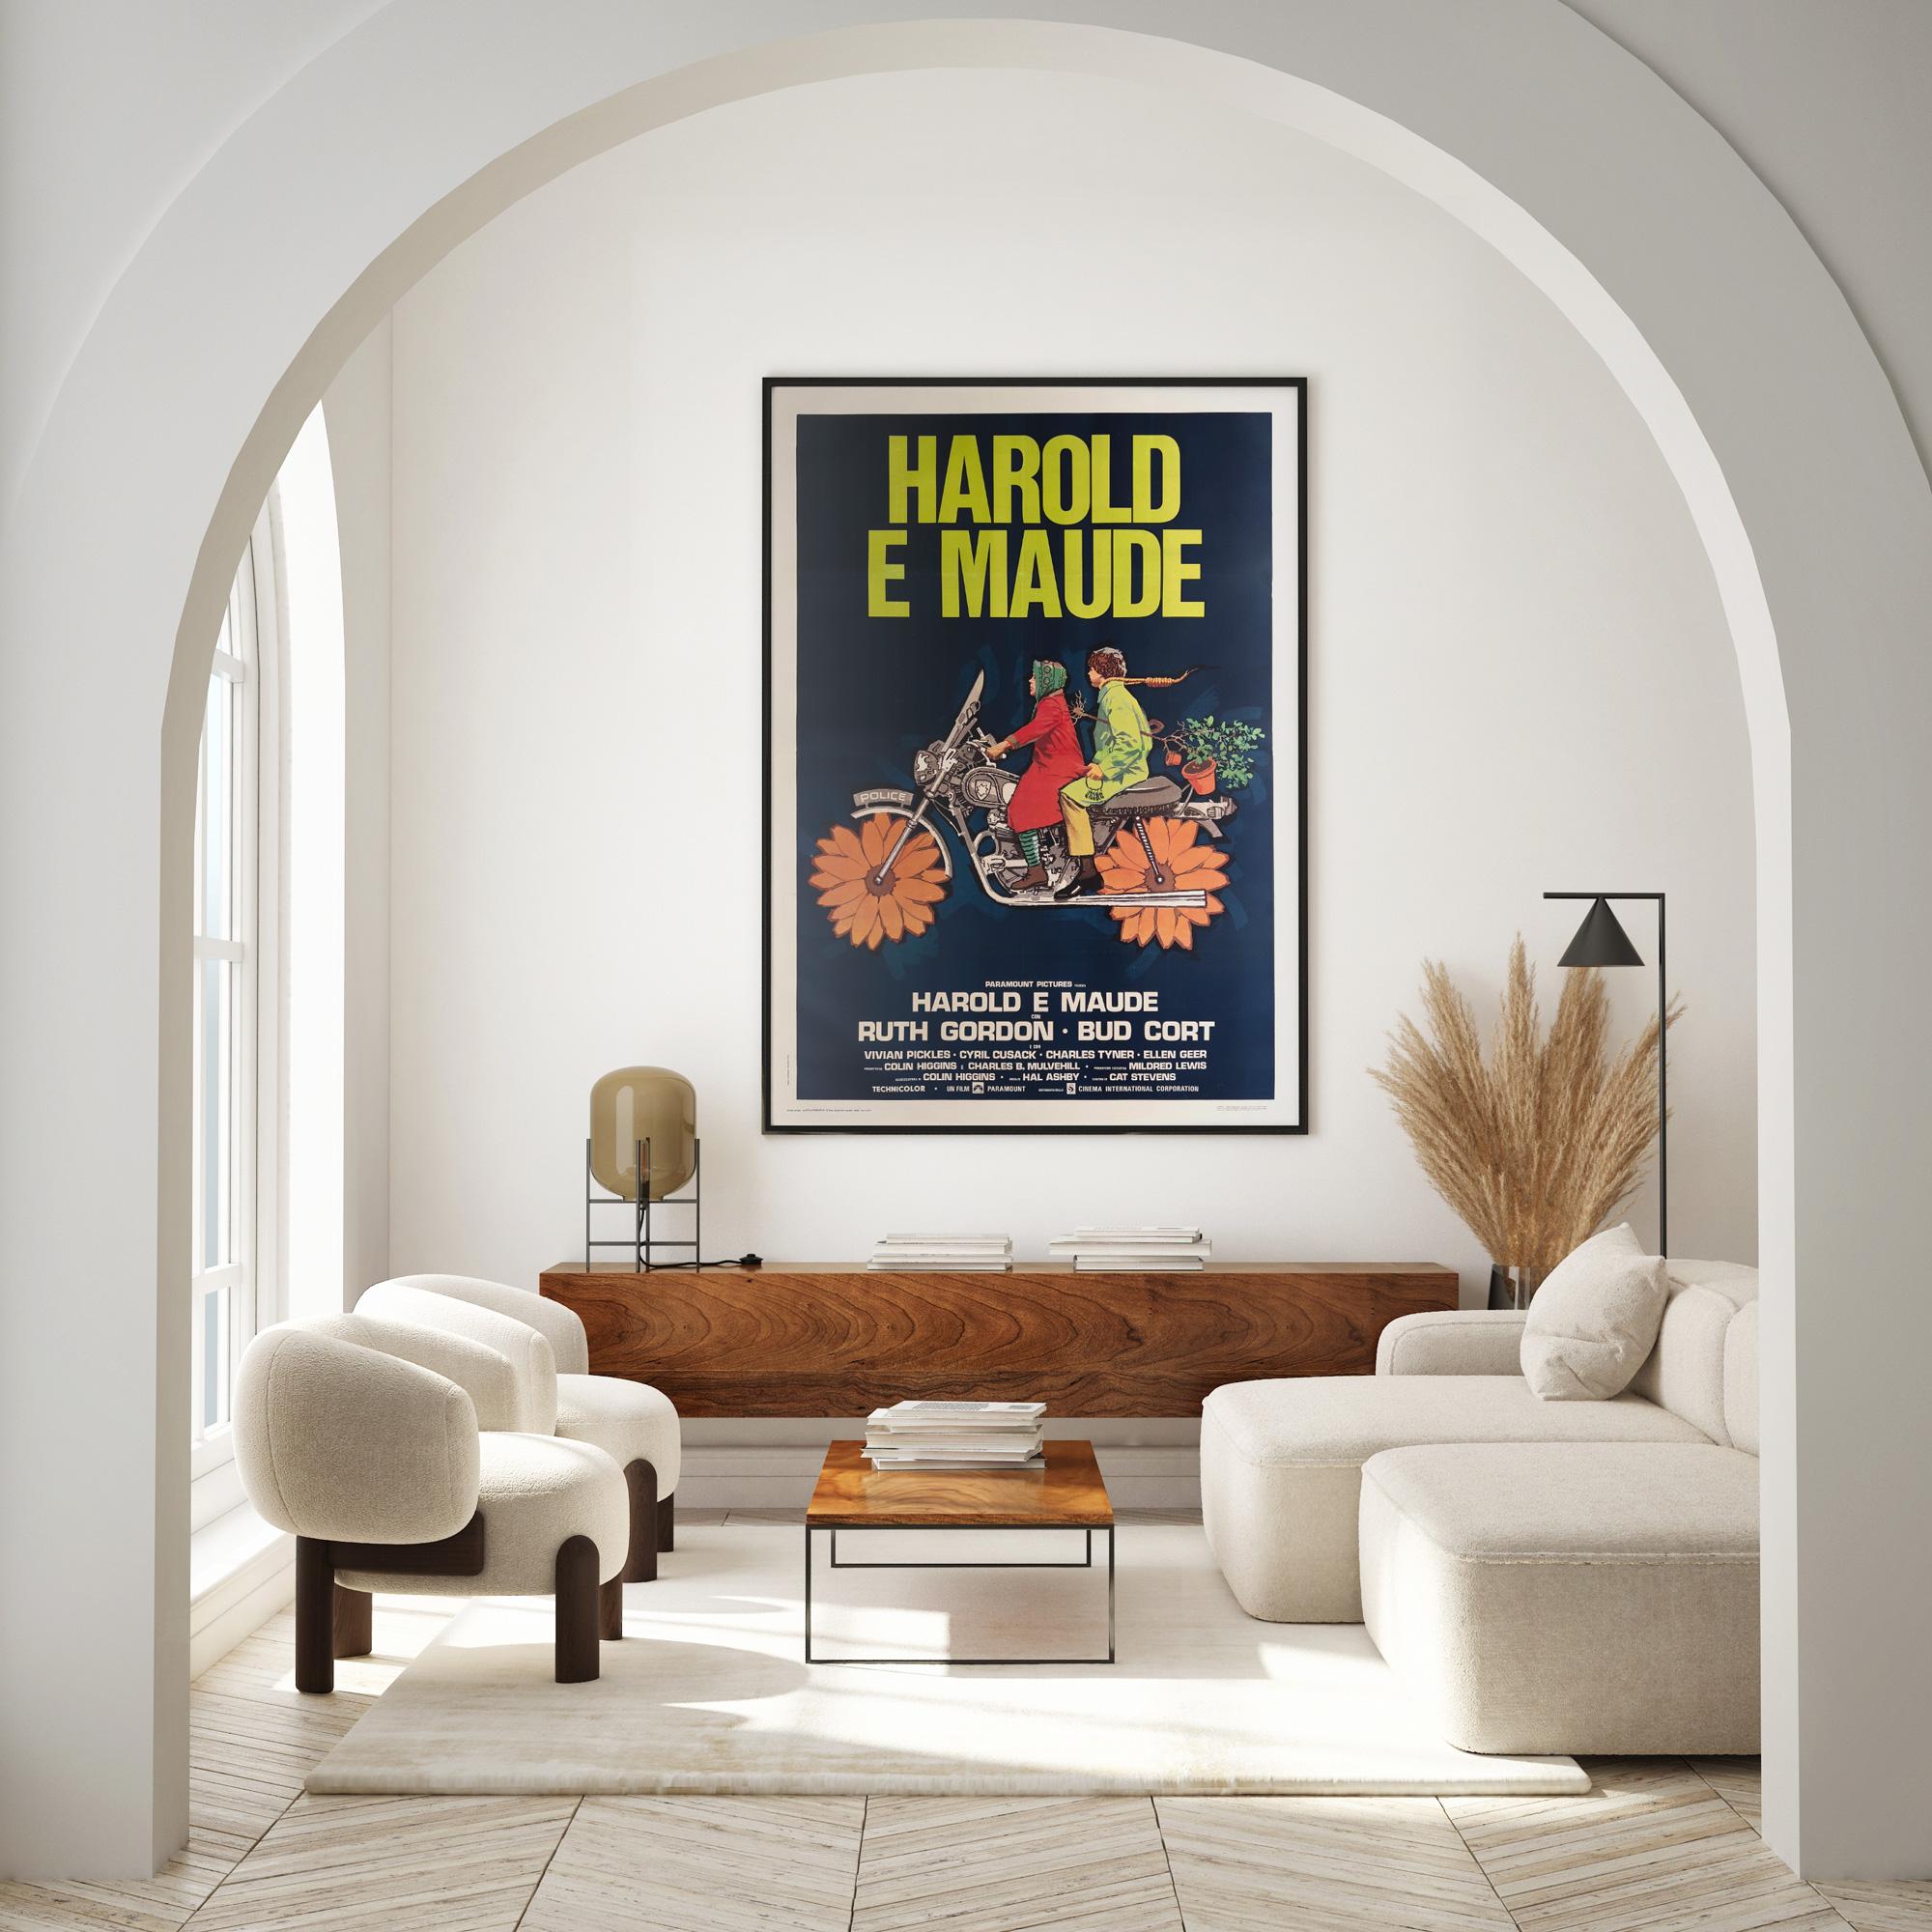 Fabulous original Italian film poster for 70s quirky British romcom classic Harold & Maude. Some of the best artwork for the title. A very rare and collectable poster in fantastic condition.

This vintage movie poster was printed in two pieces and